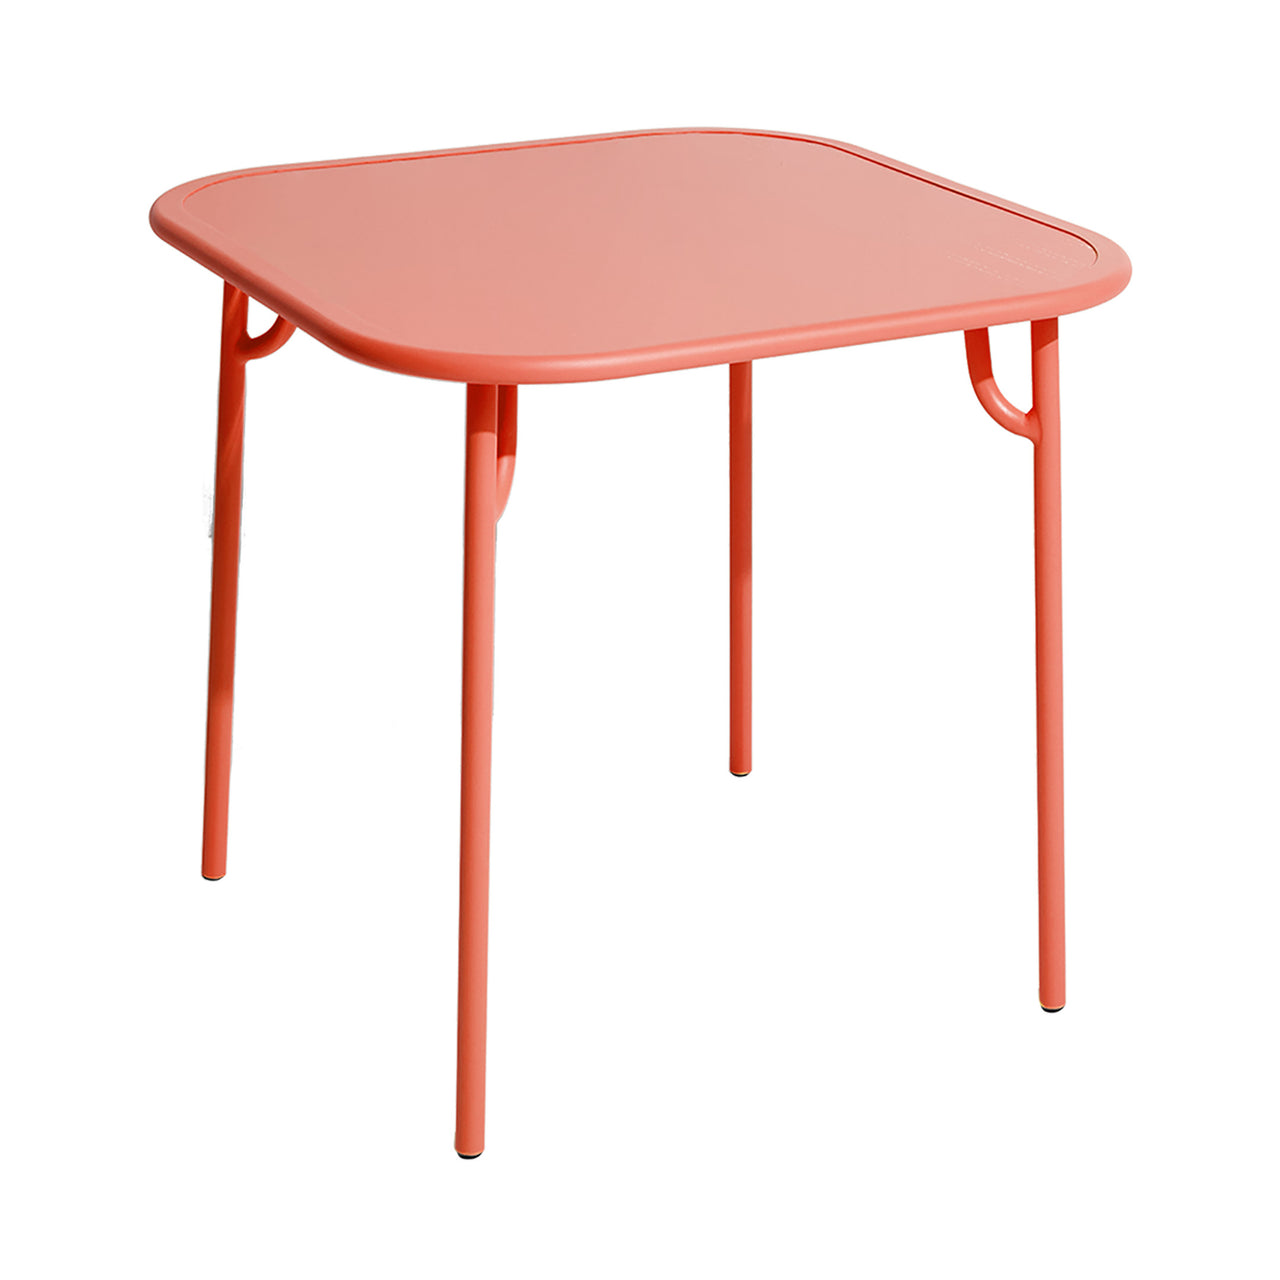 Week-End Square Dining Table: Coral